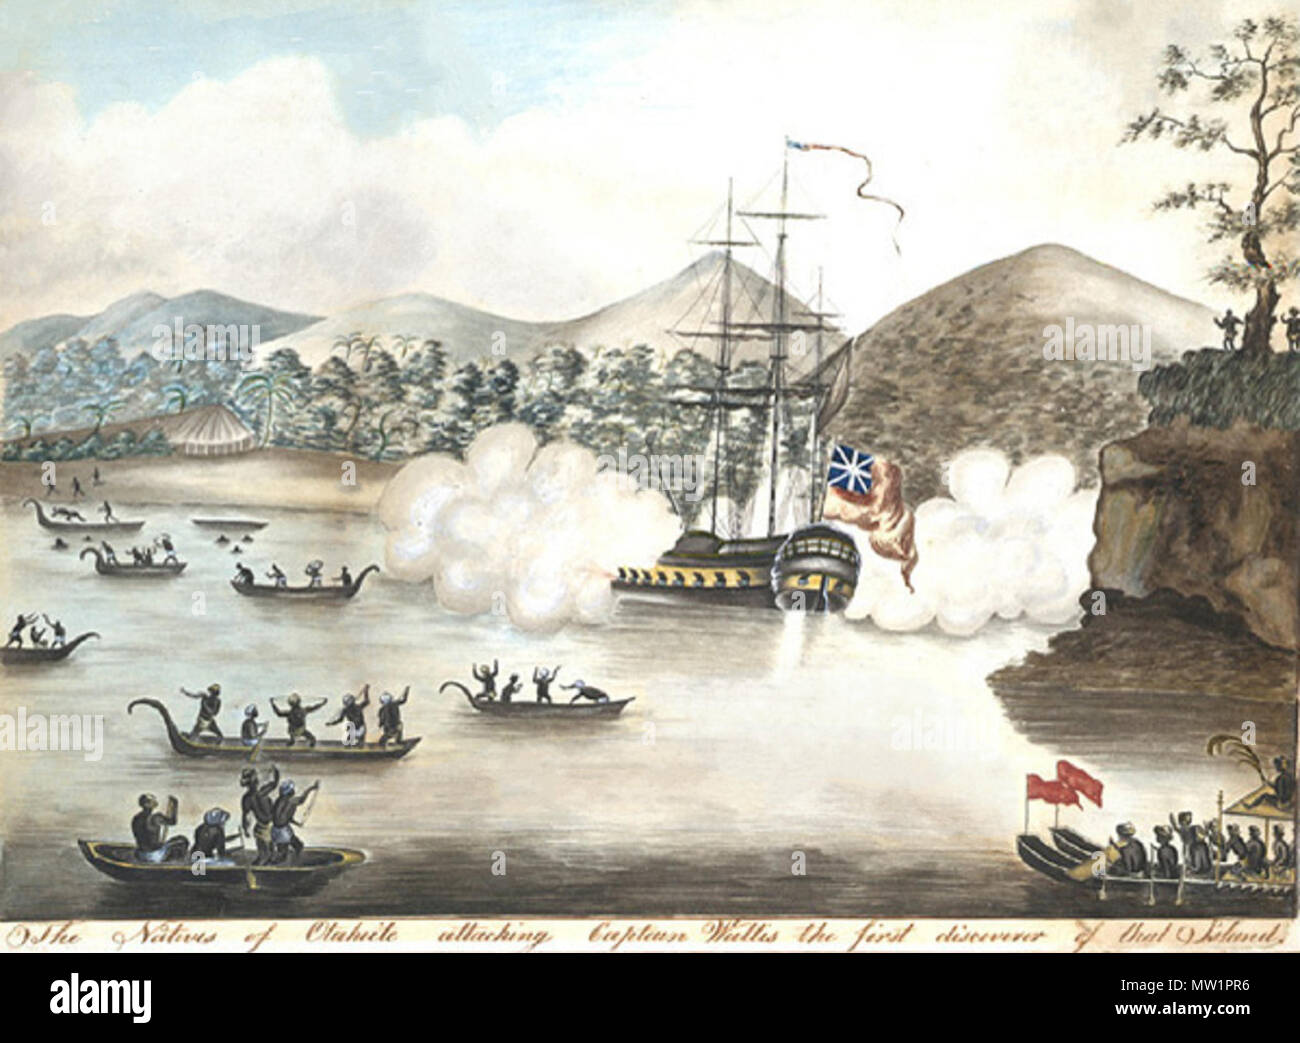 . The Natives of Otaheite Attacking Captain Wallis the First Discoverer of That Island by an unknown artist . 12 September 2011, 01:36 (UTC).  The Natives of Otaheite Attacking Captain Wallis the First Discoverer of That Island.jpg: Unknown derivative work: Materialscientist (talk) 597 The Natives of Otaheite Attacking Captain Wallis retouched Stock Photo